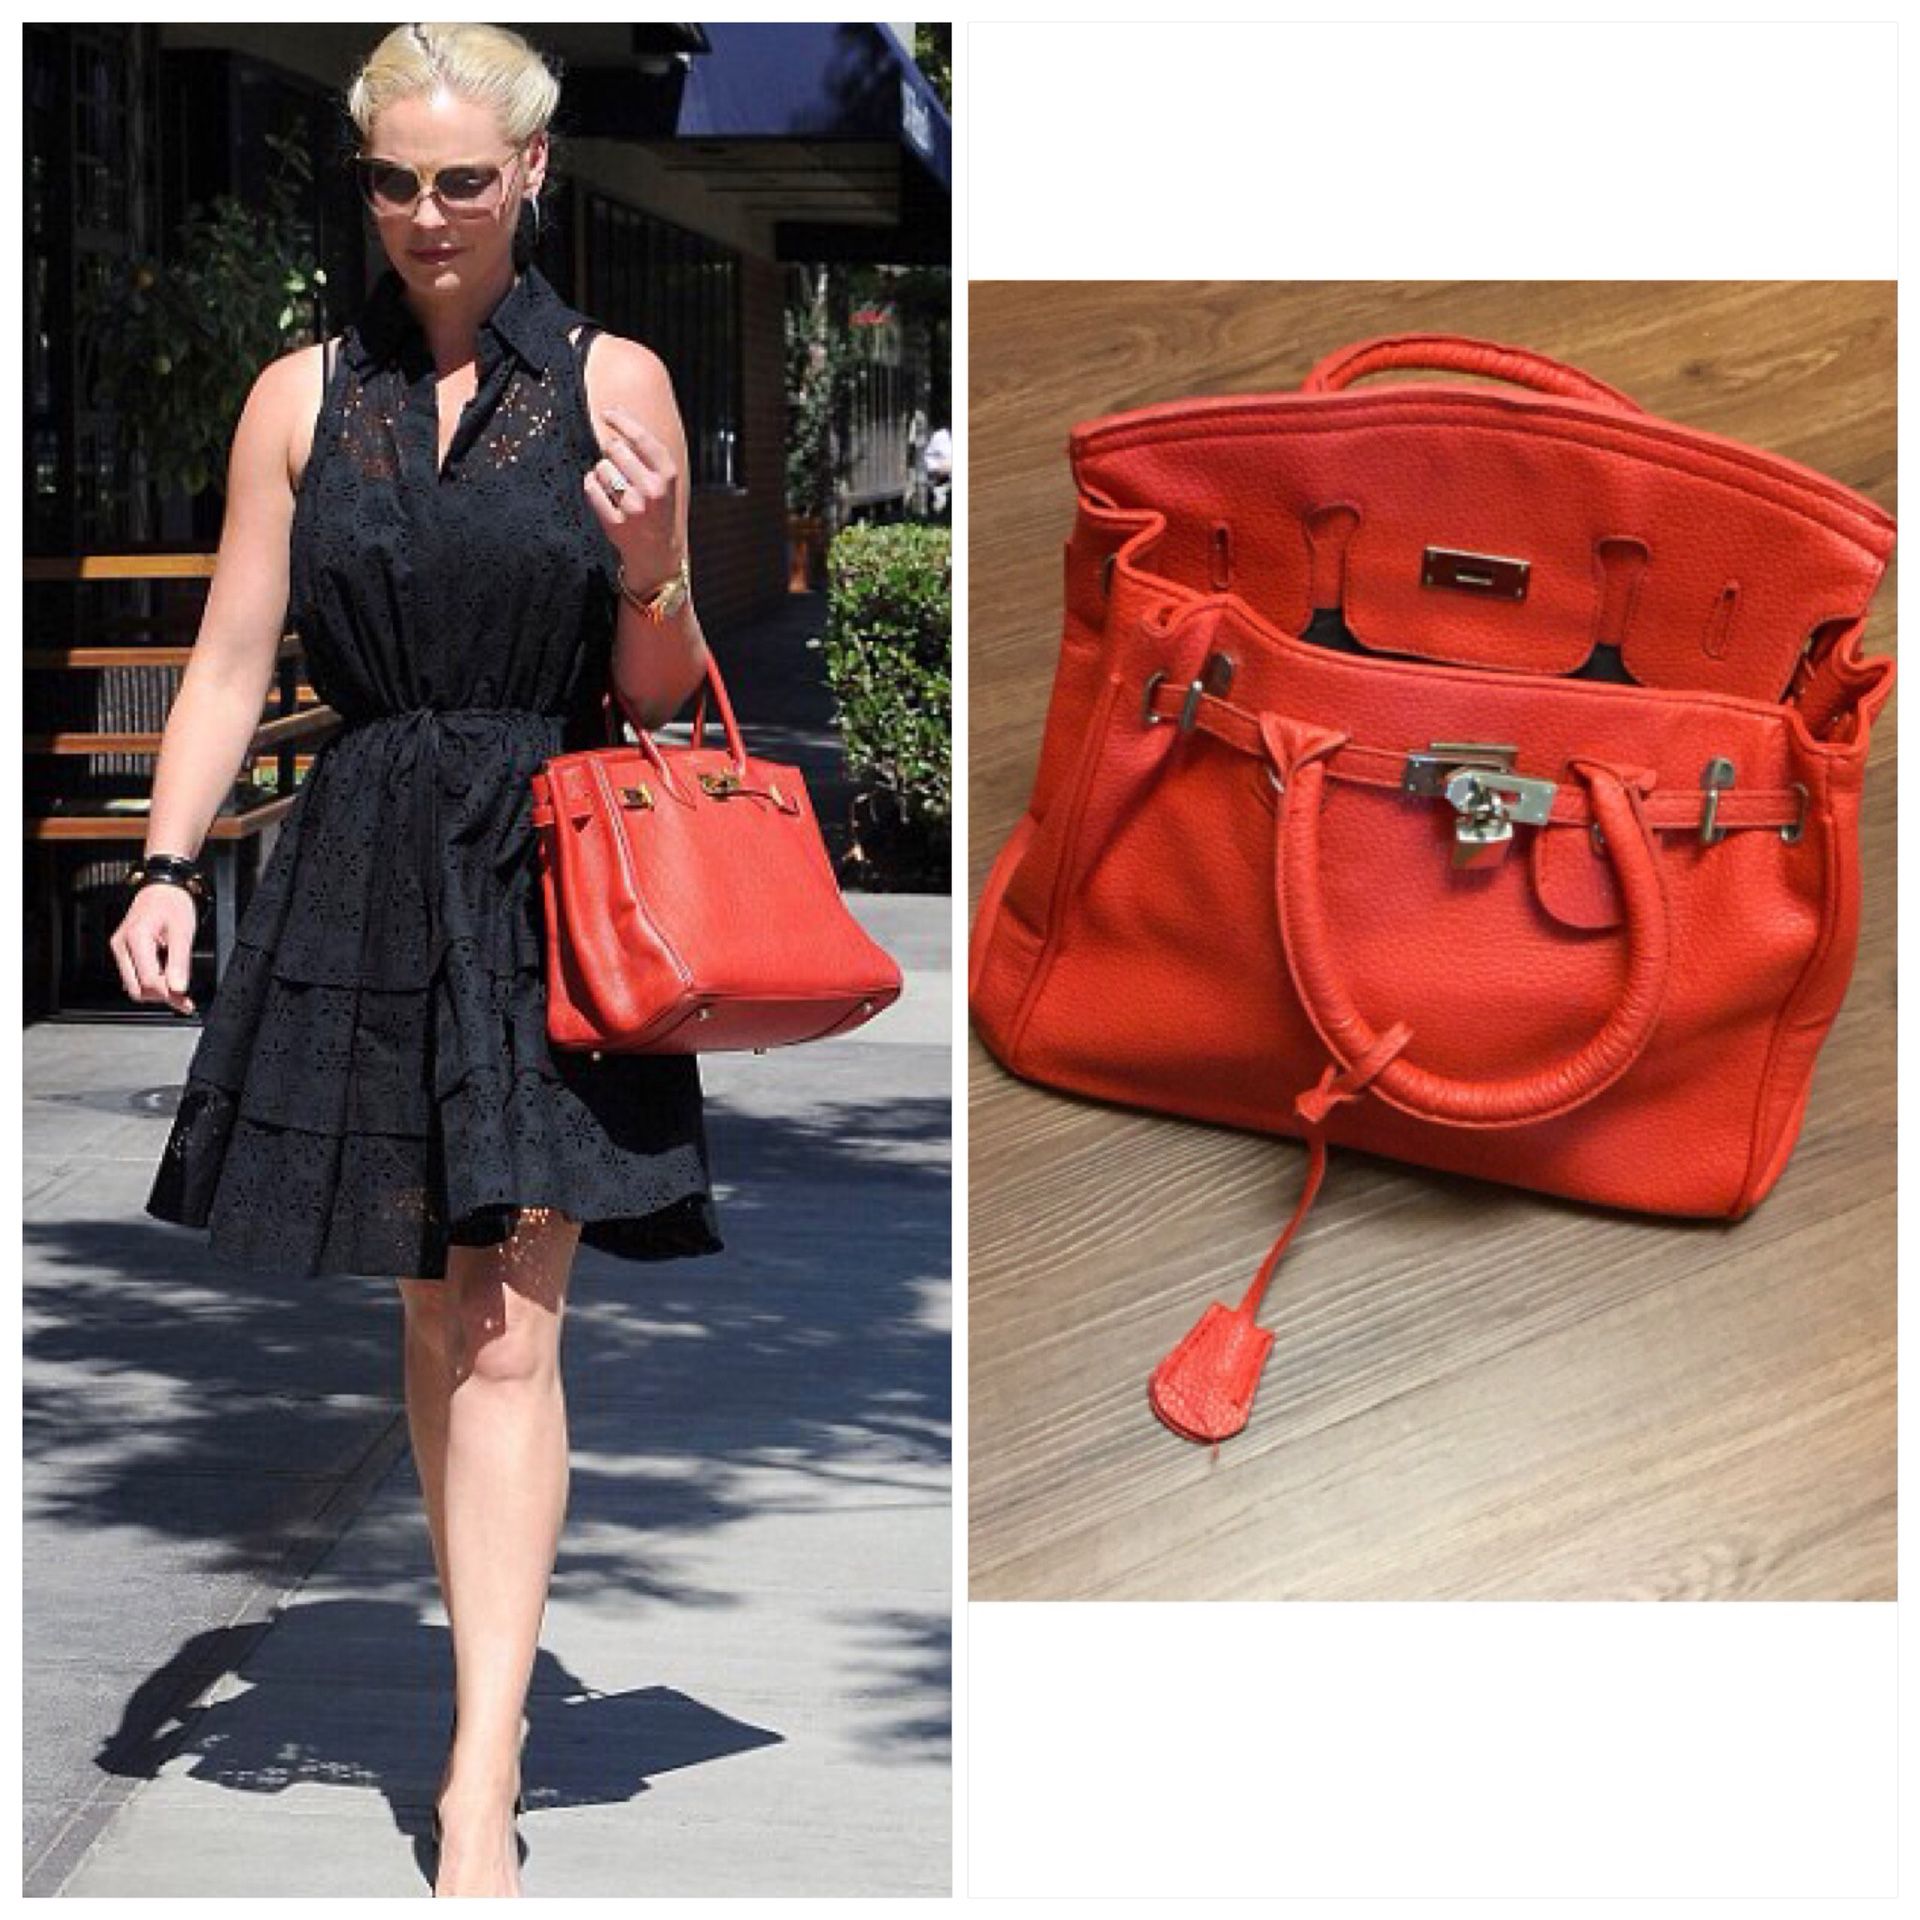 RED HANDBAG 👜 -DRESS LIKE A CELEBRITY FOR ALMOST NOTHING